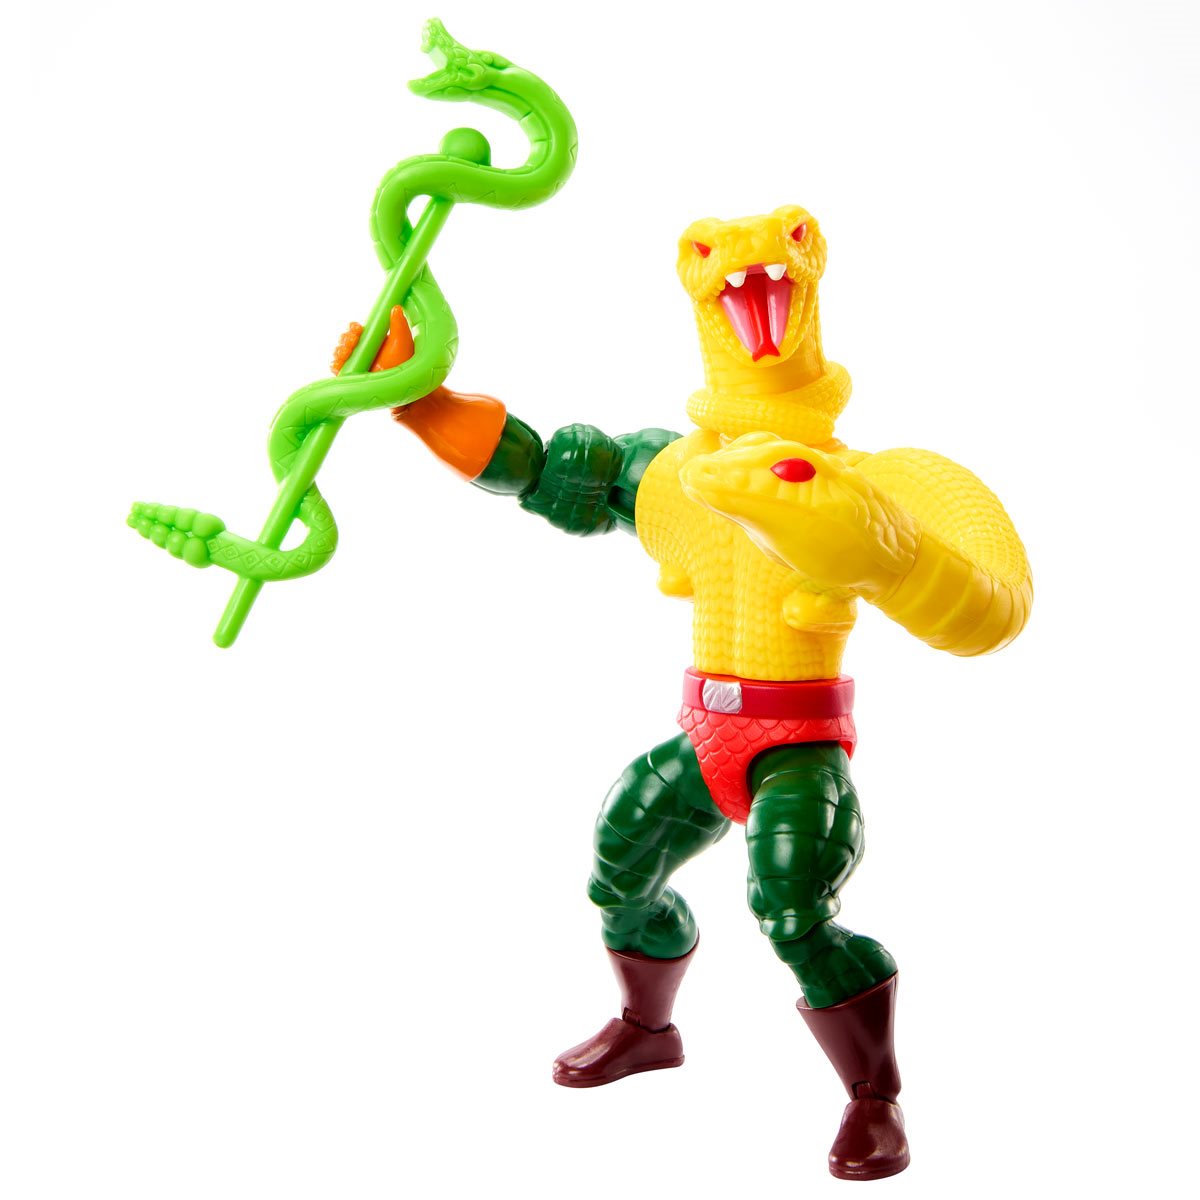 Masters of the Universe Origins Deluxe - King Hiss